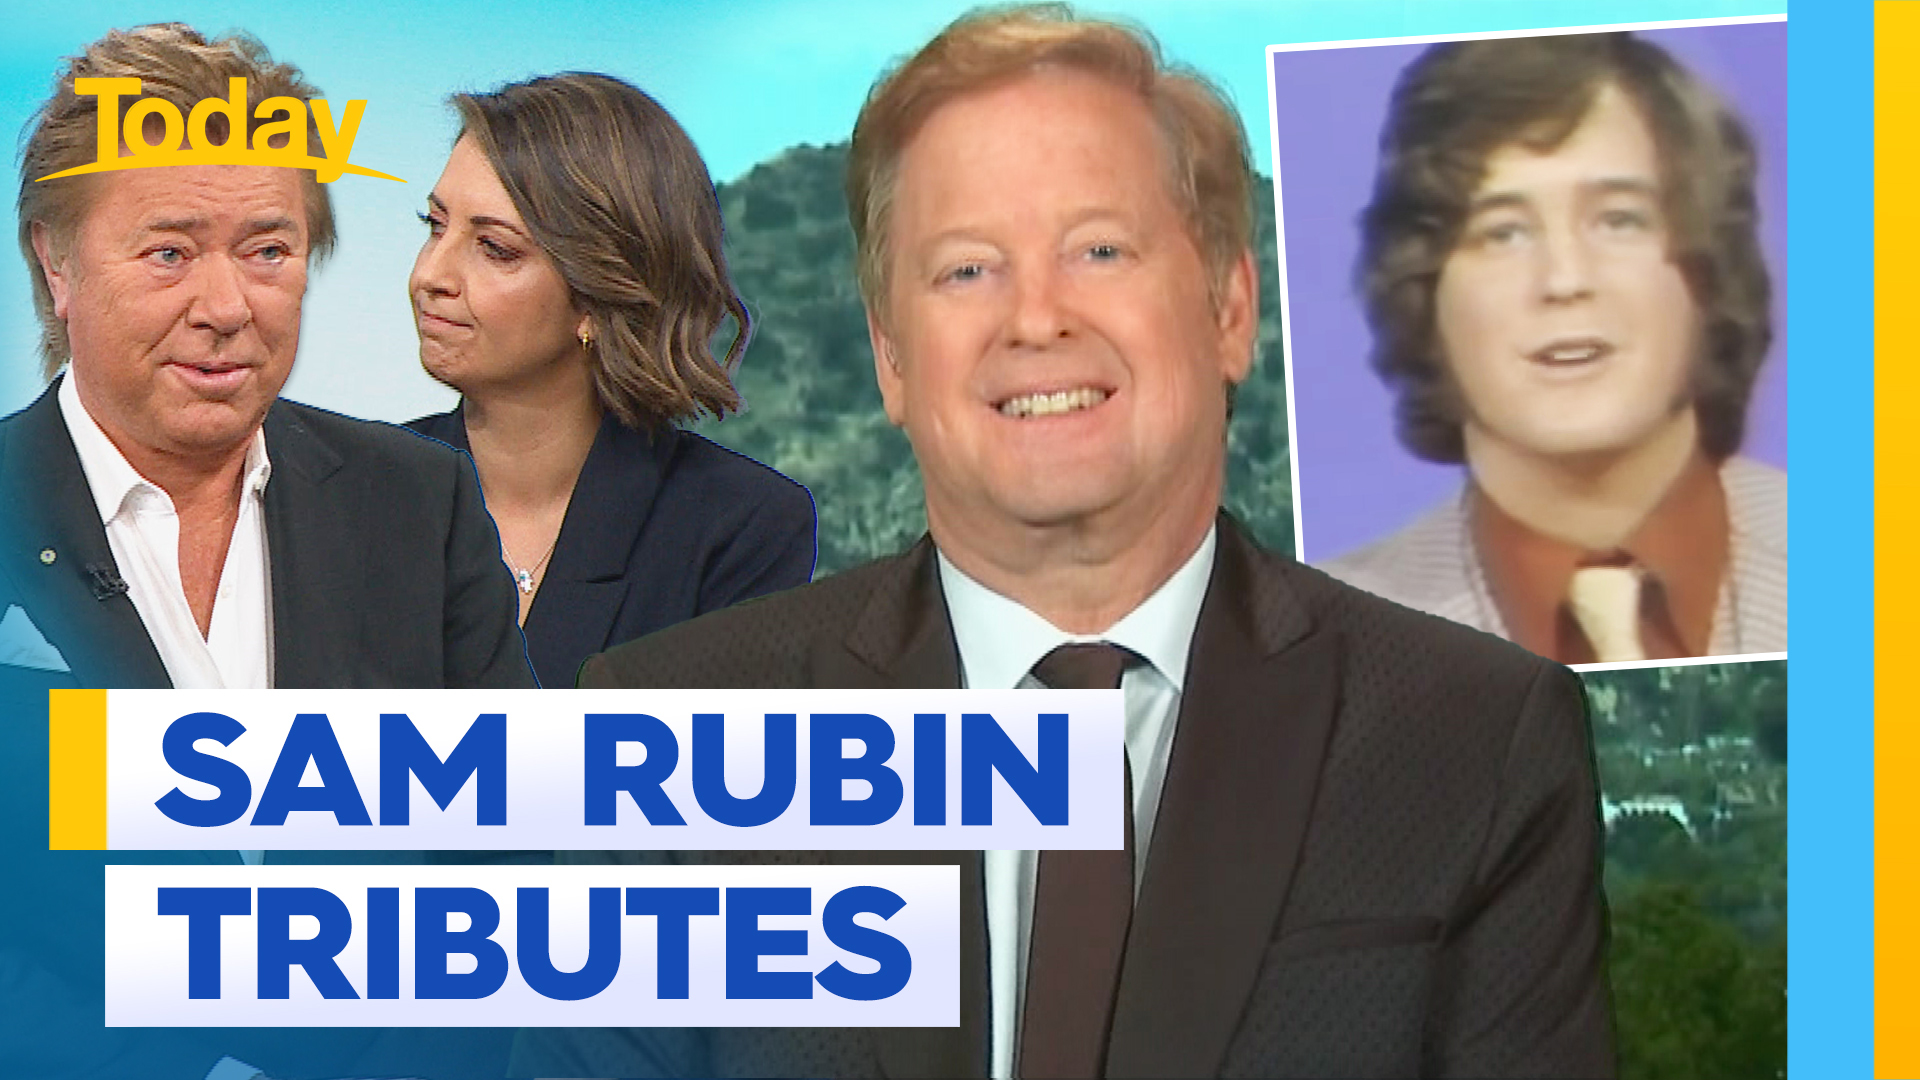 The Today team pay tribute to Sam Rubin